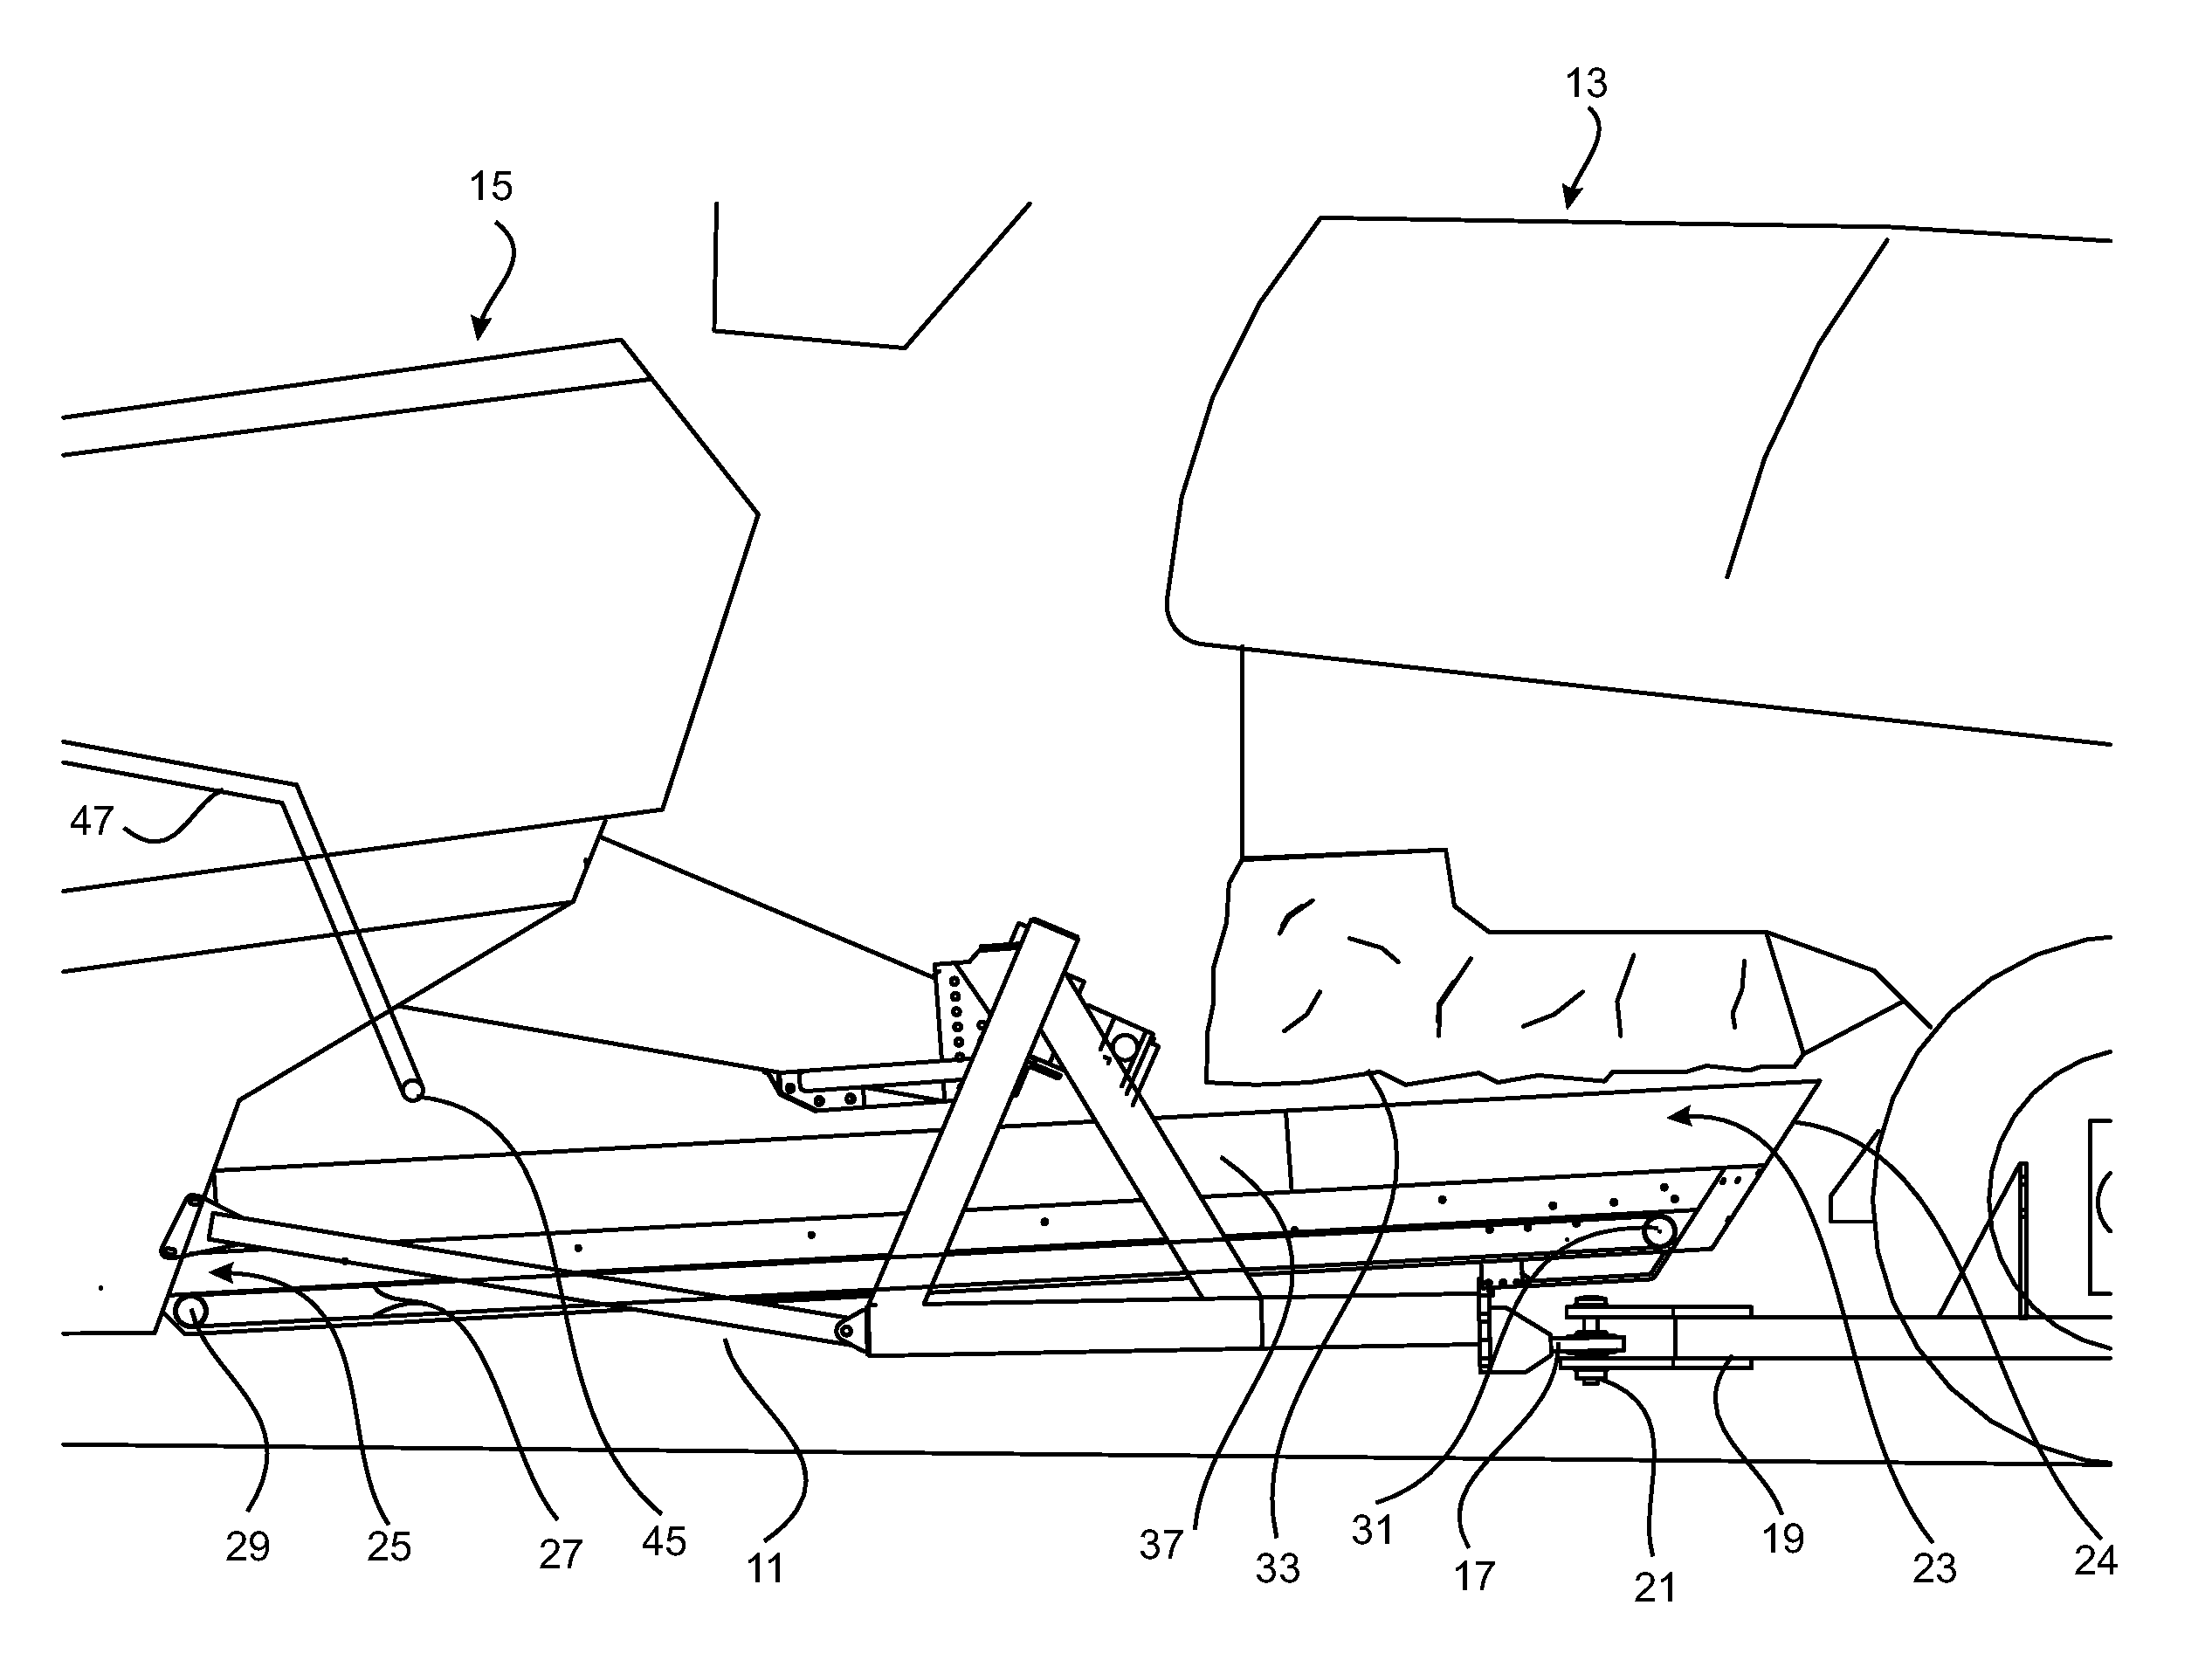 Attachment for connection of harvesting combine harvester  and baler